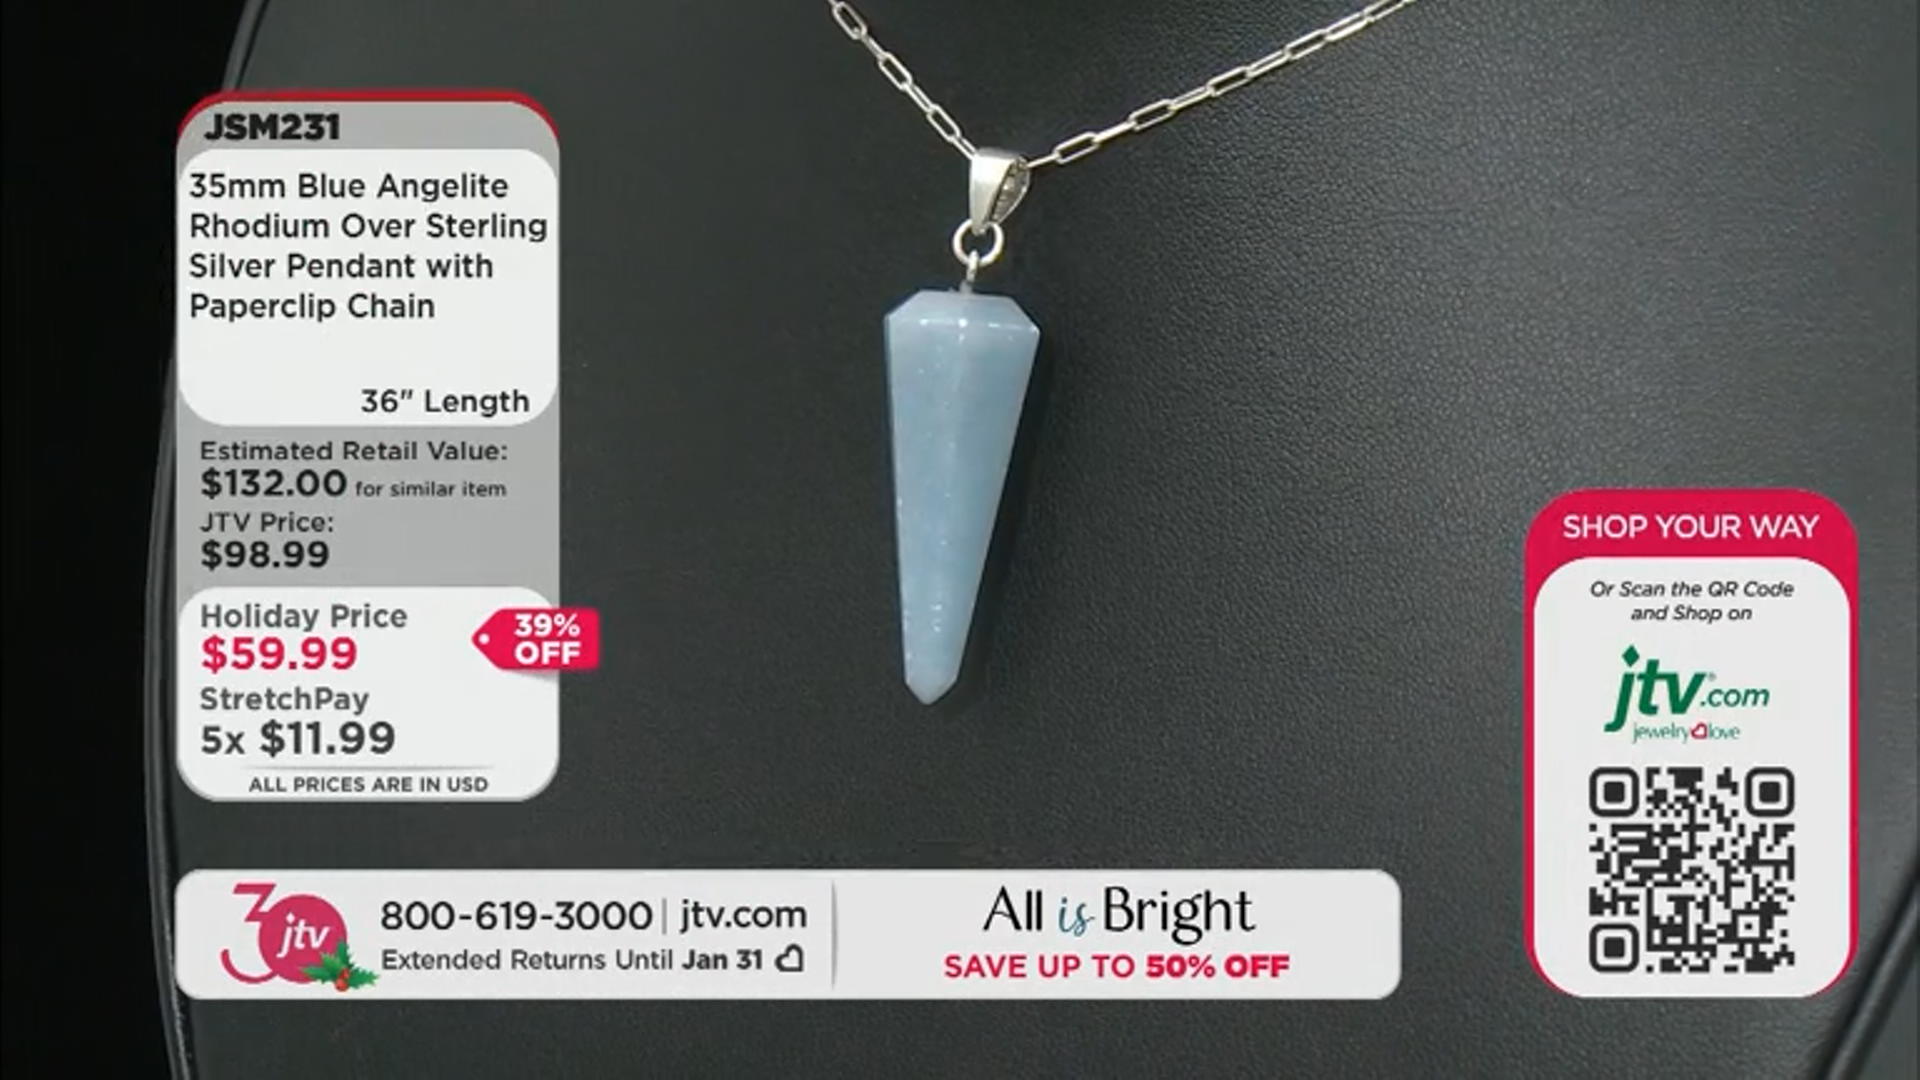 Blue Angelite Rhodium Over Sterling Silver Pendant With Paperclip Chain Video Thumbnail